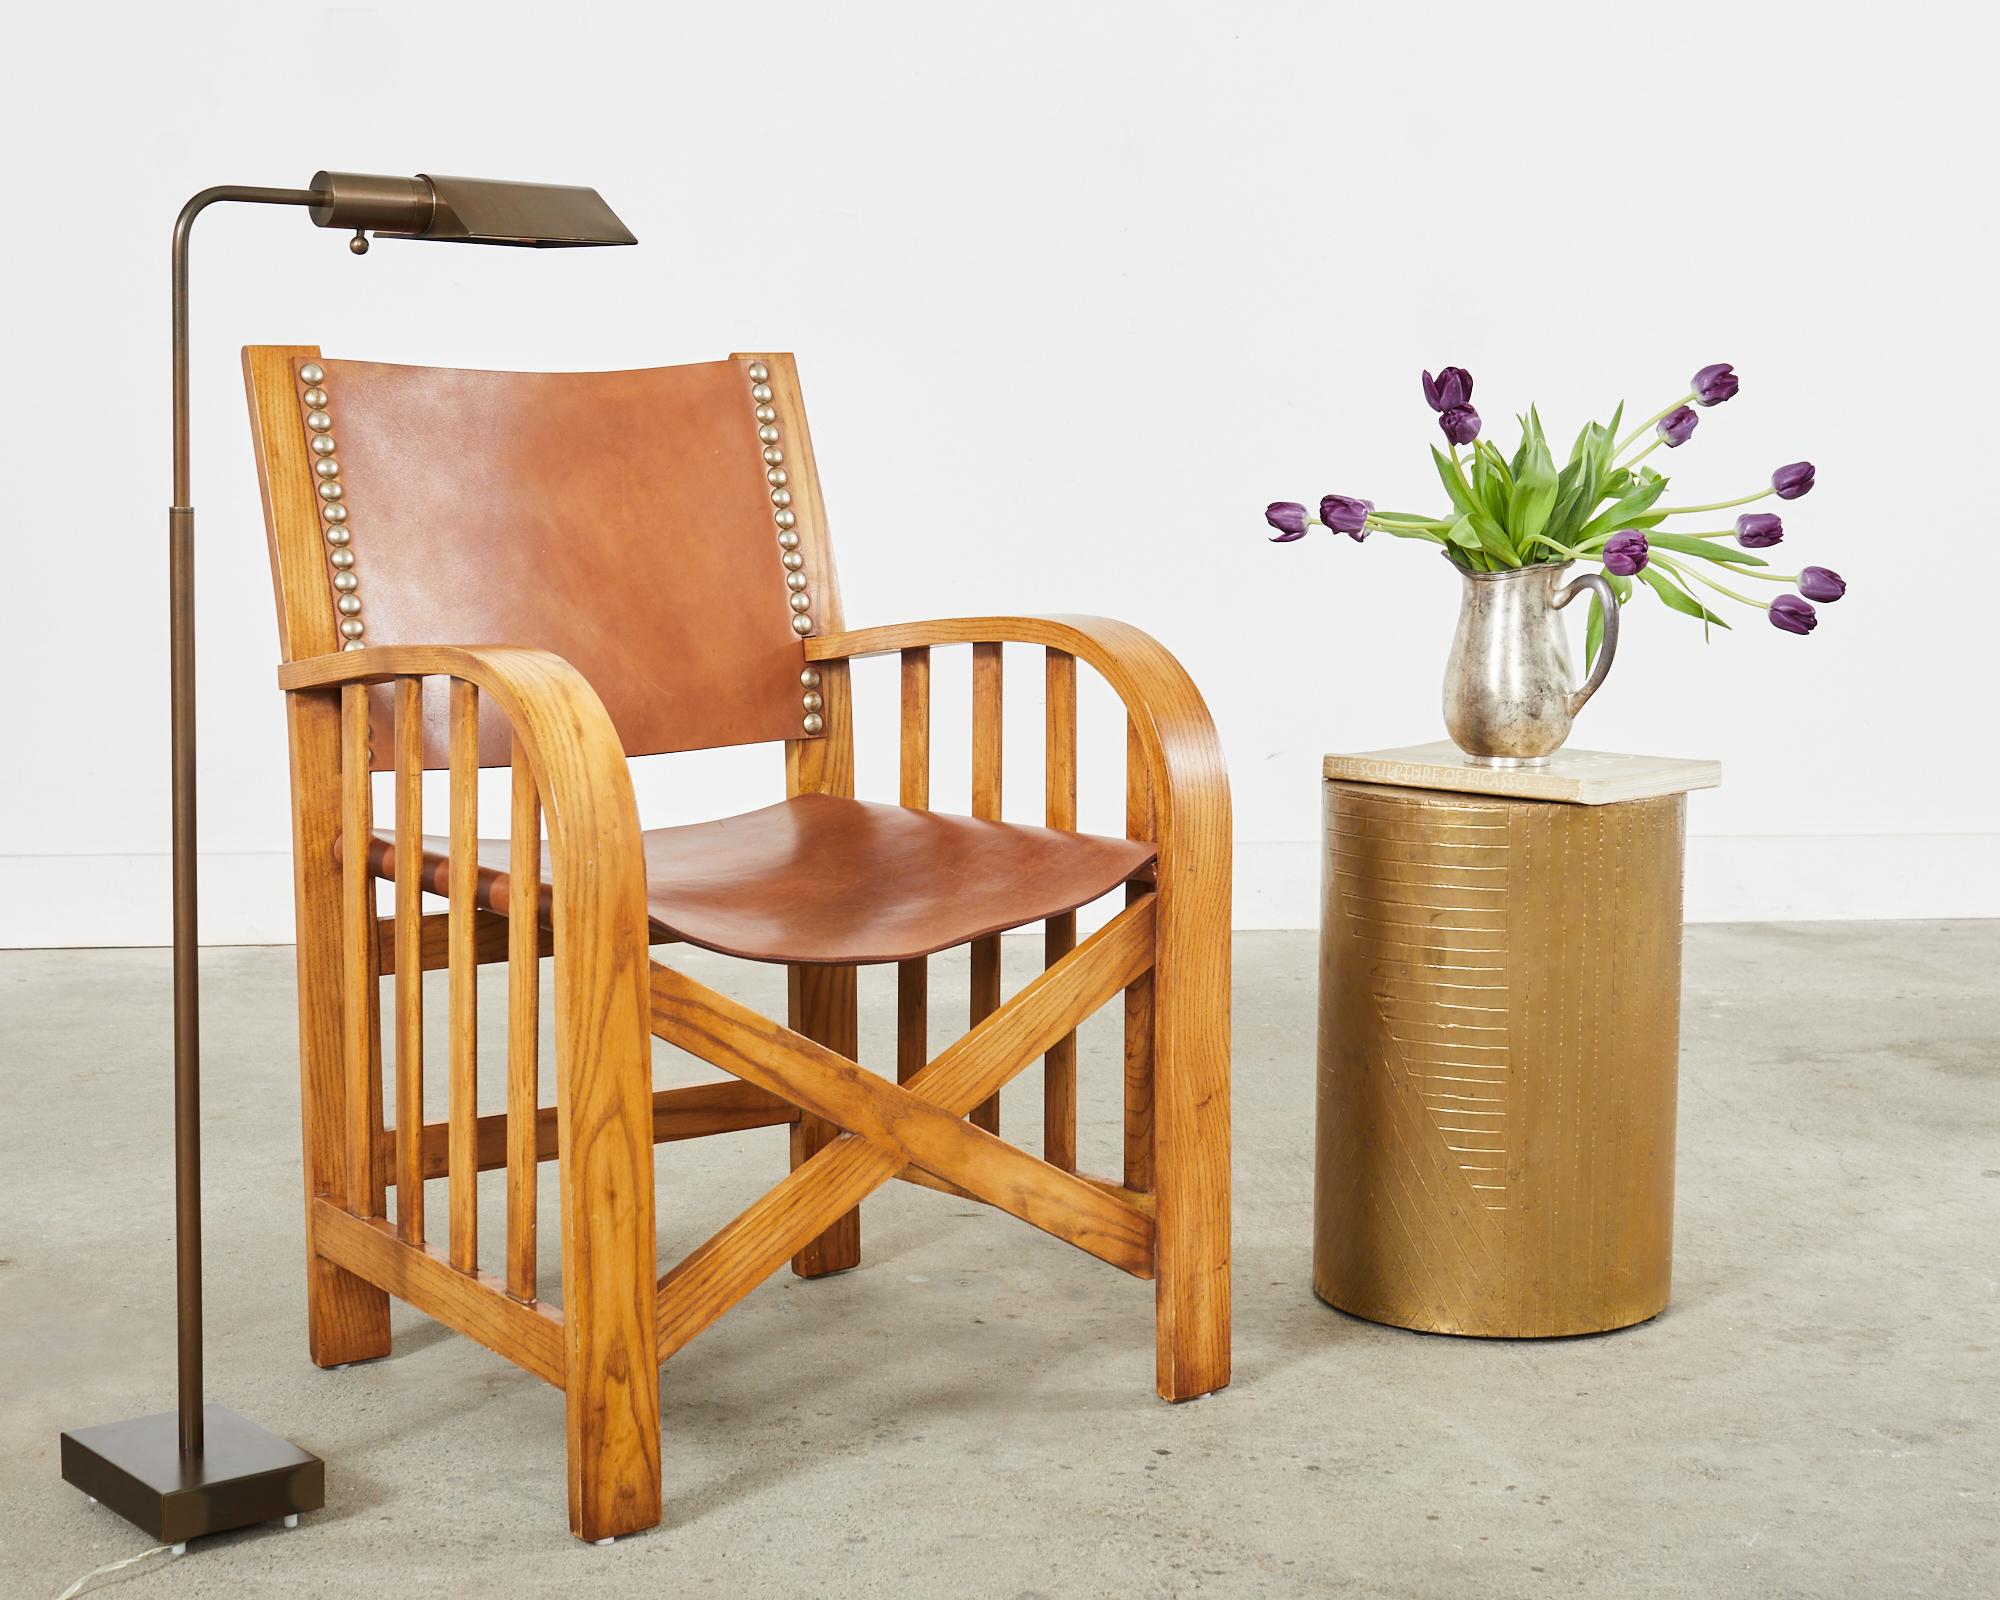 Distinctive country American armchair made of solid ash designed by Ralph from the sheltering sky collection. The frames have gracefully curved wide arms nearly 27 inches high. The arms are supported by open slat sides with an x-form stretcher in